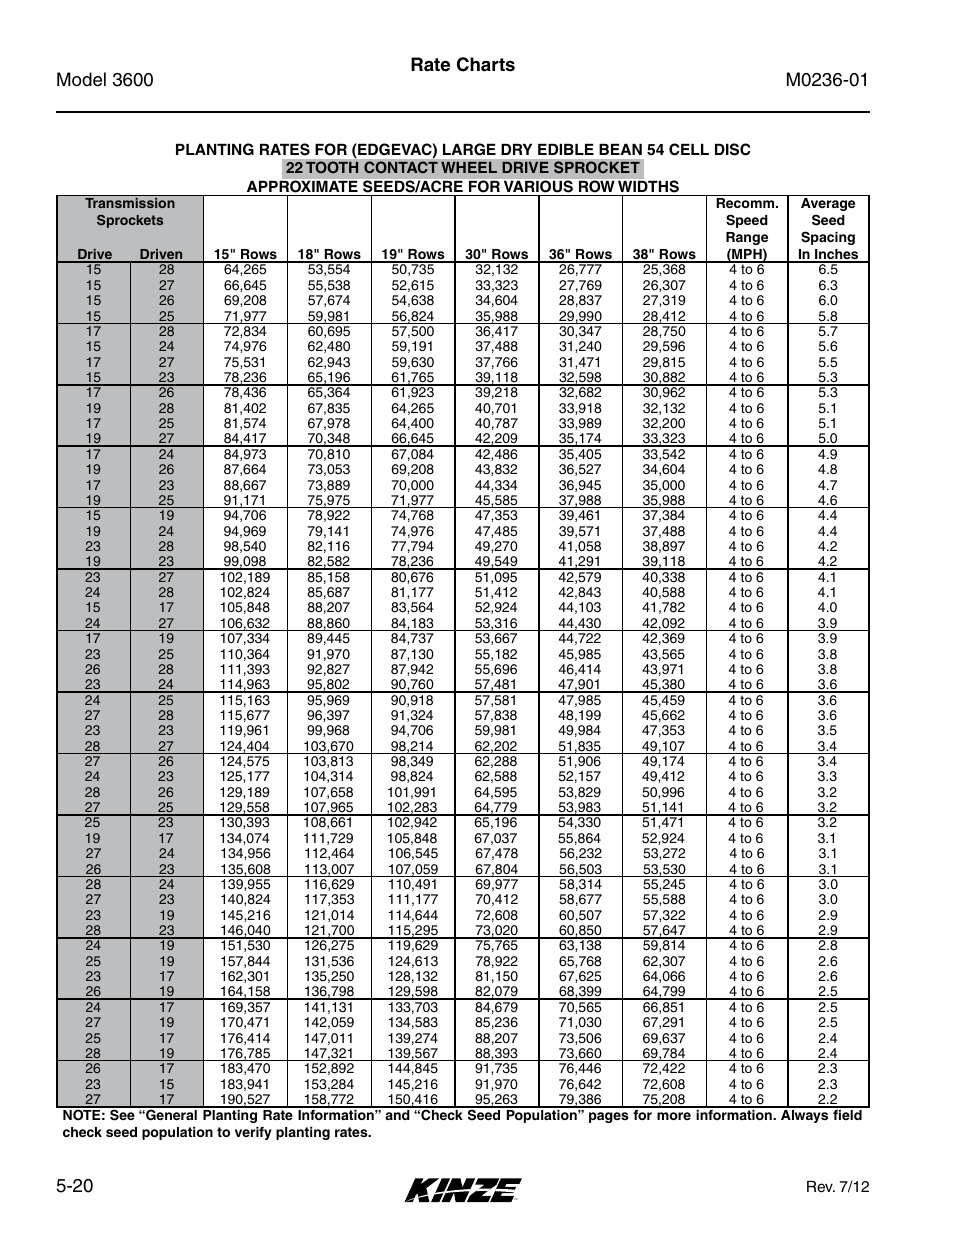 Rate charts | Kinze 3600 Lift and Rotate Planter Rev. 7/14 User Manual | Page 98 / 172